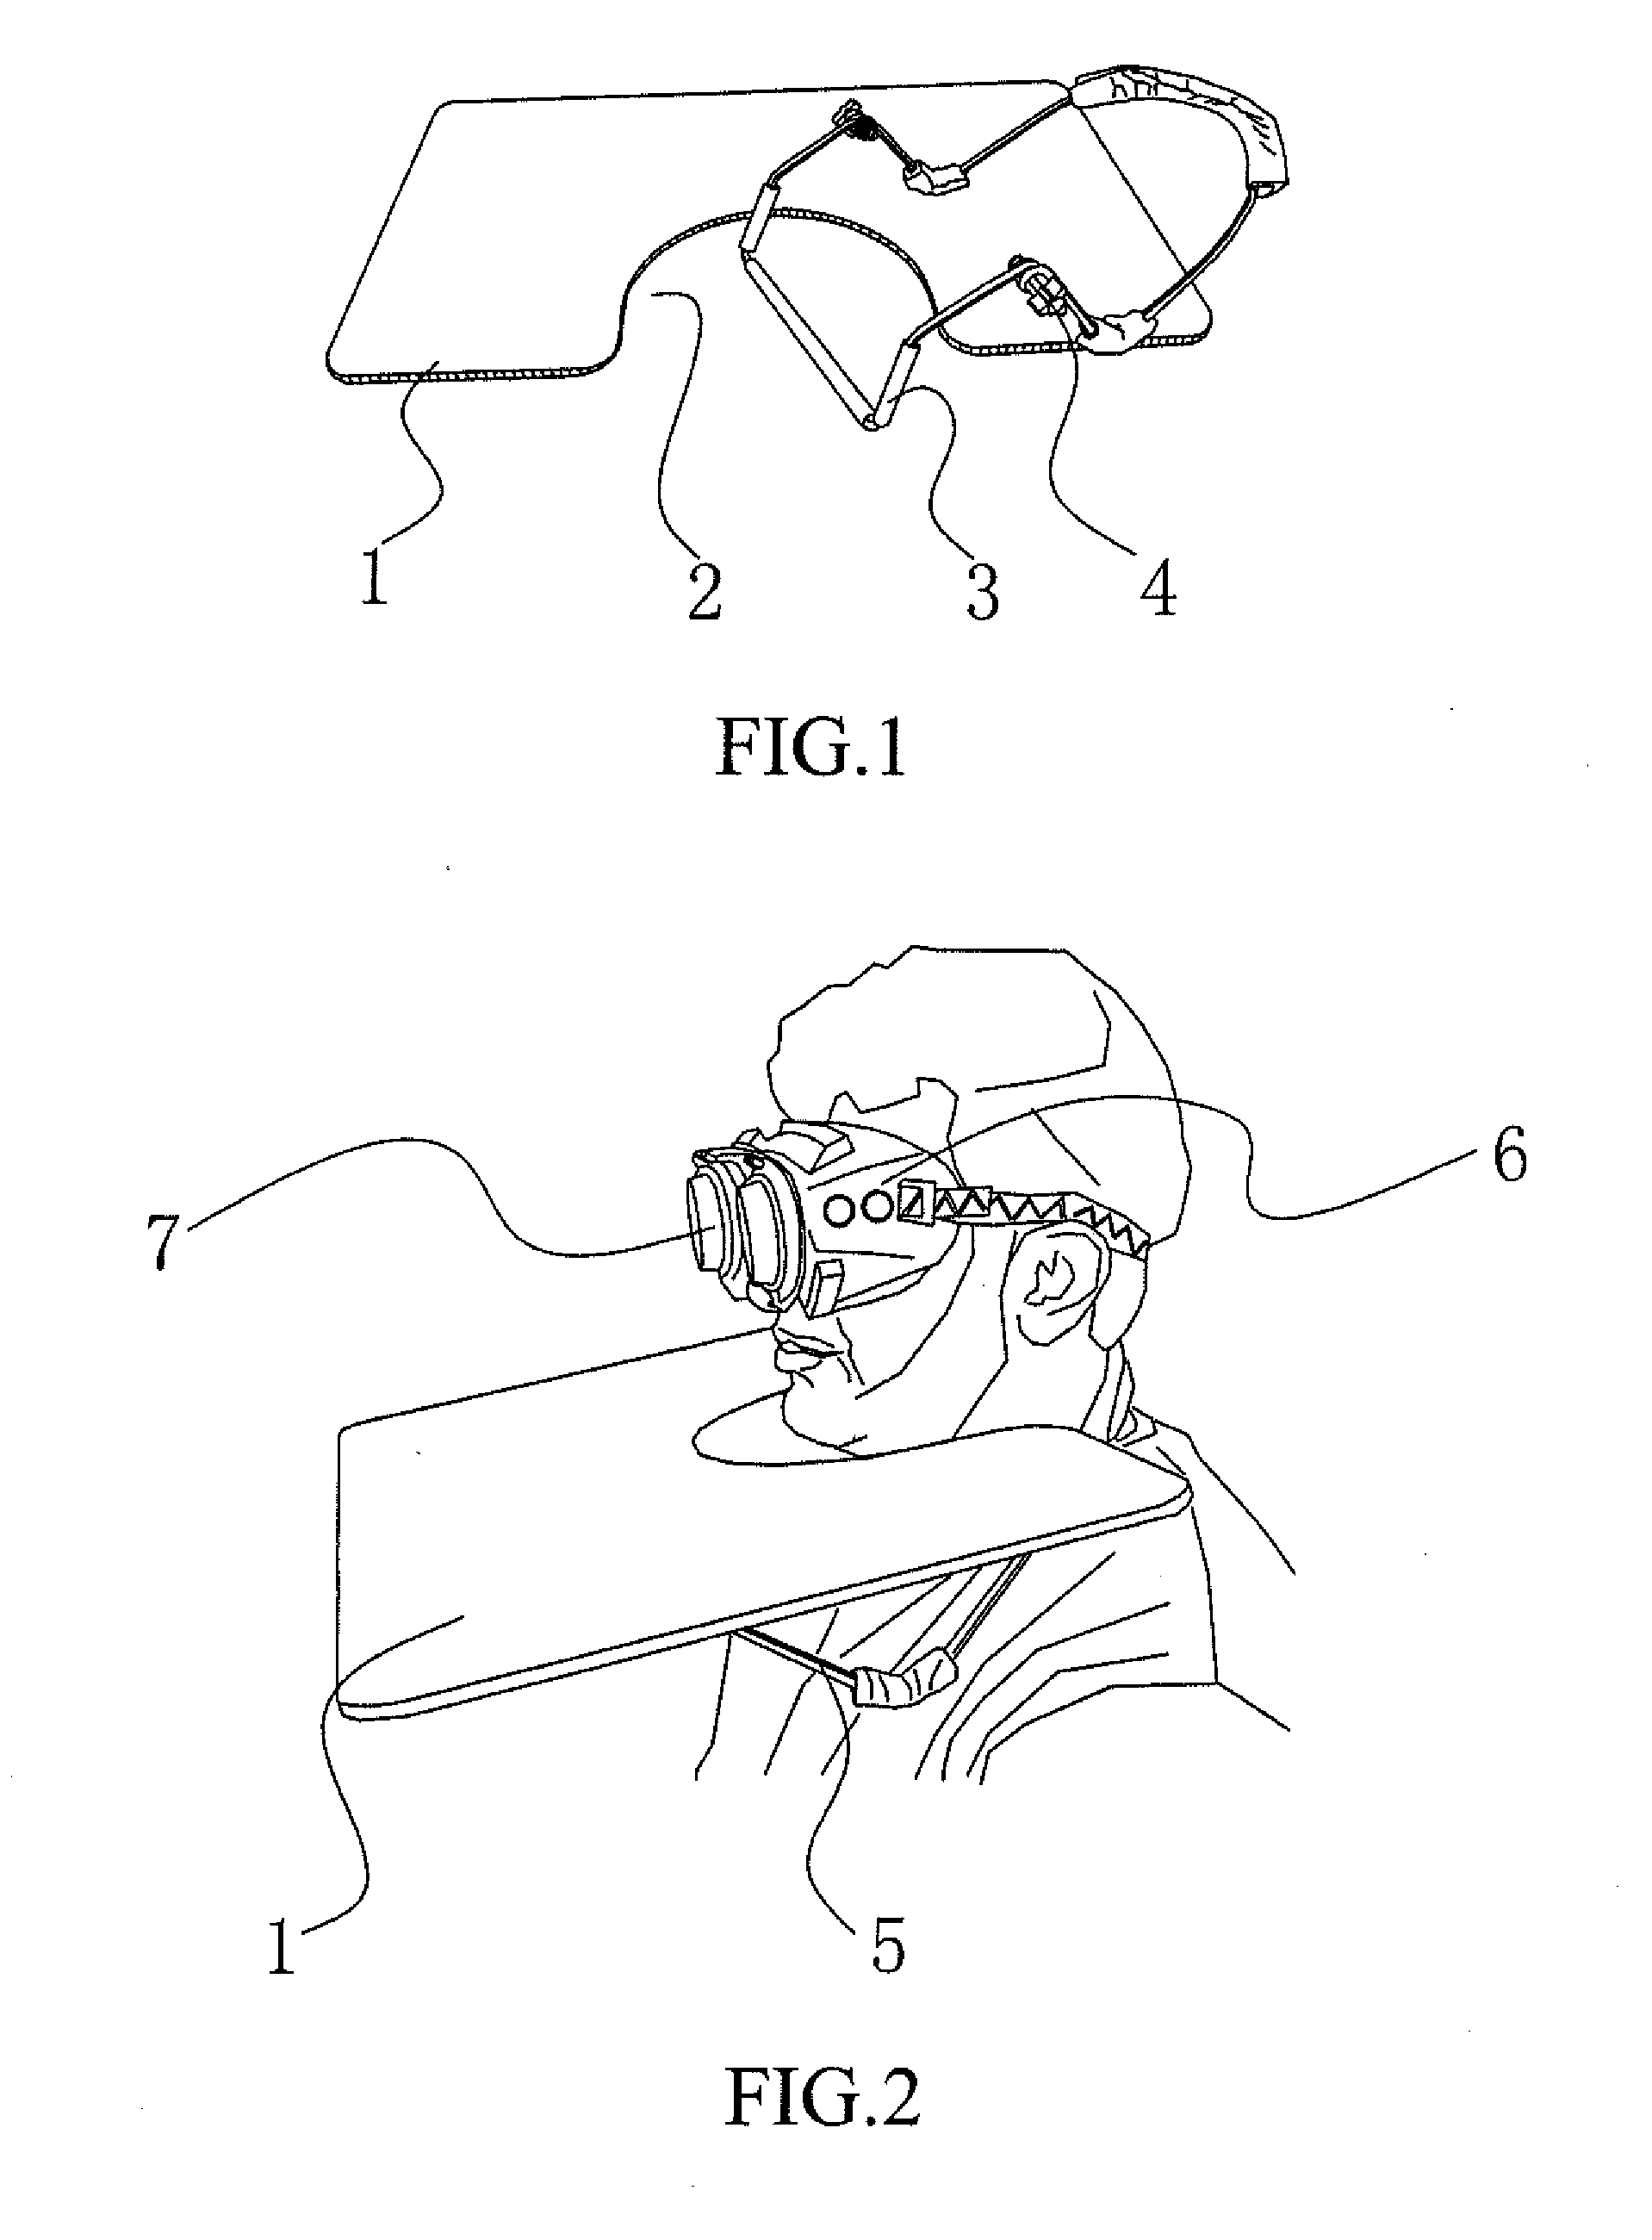 Wearable systems and methods for treatment of a neurocognitive condition